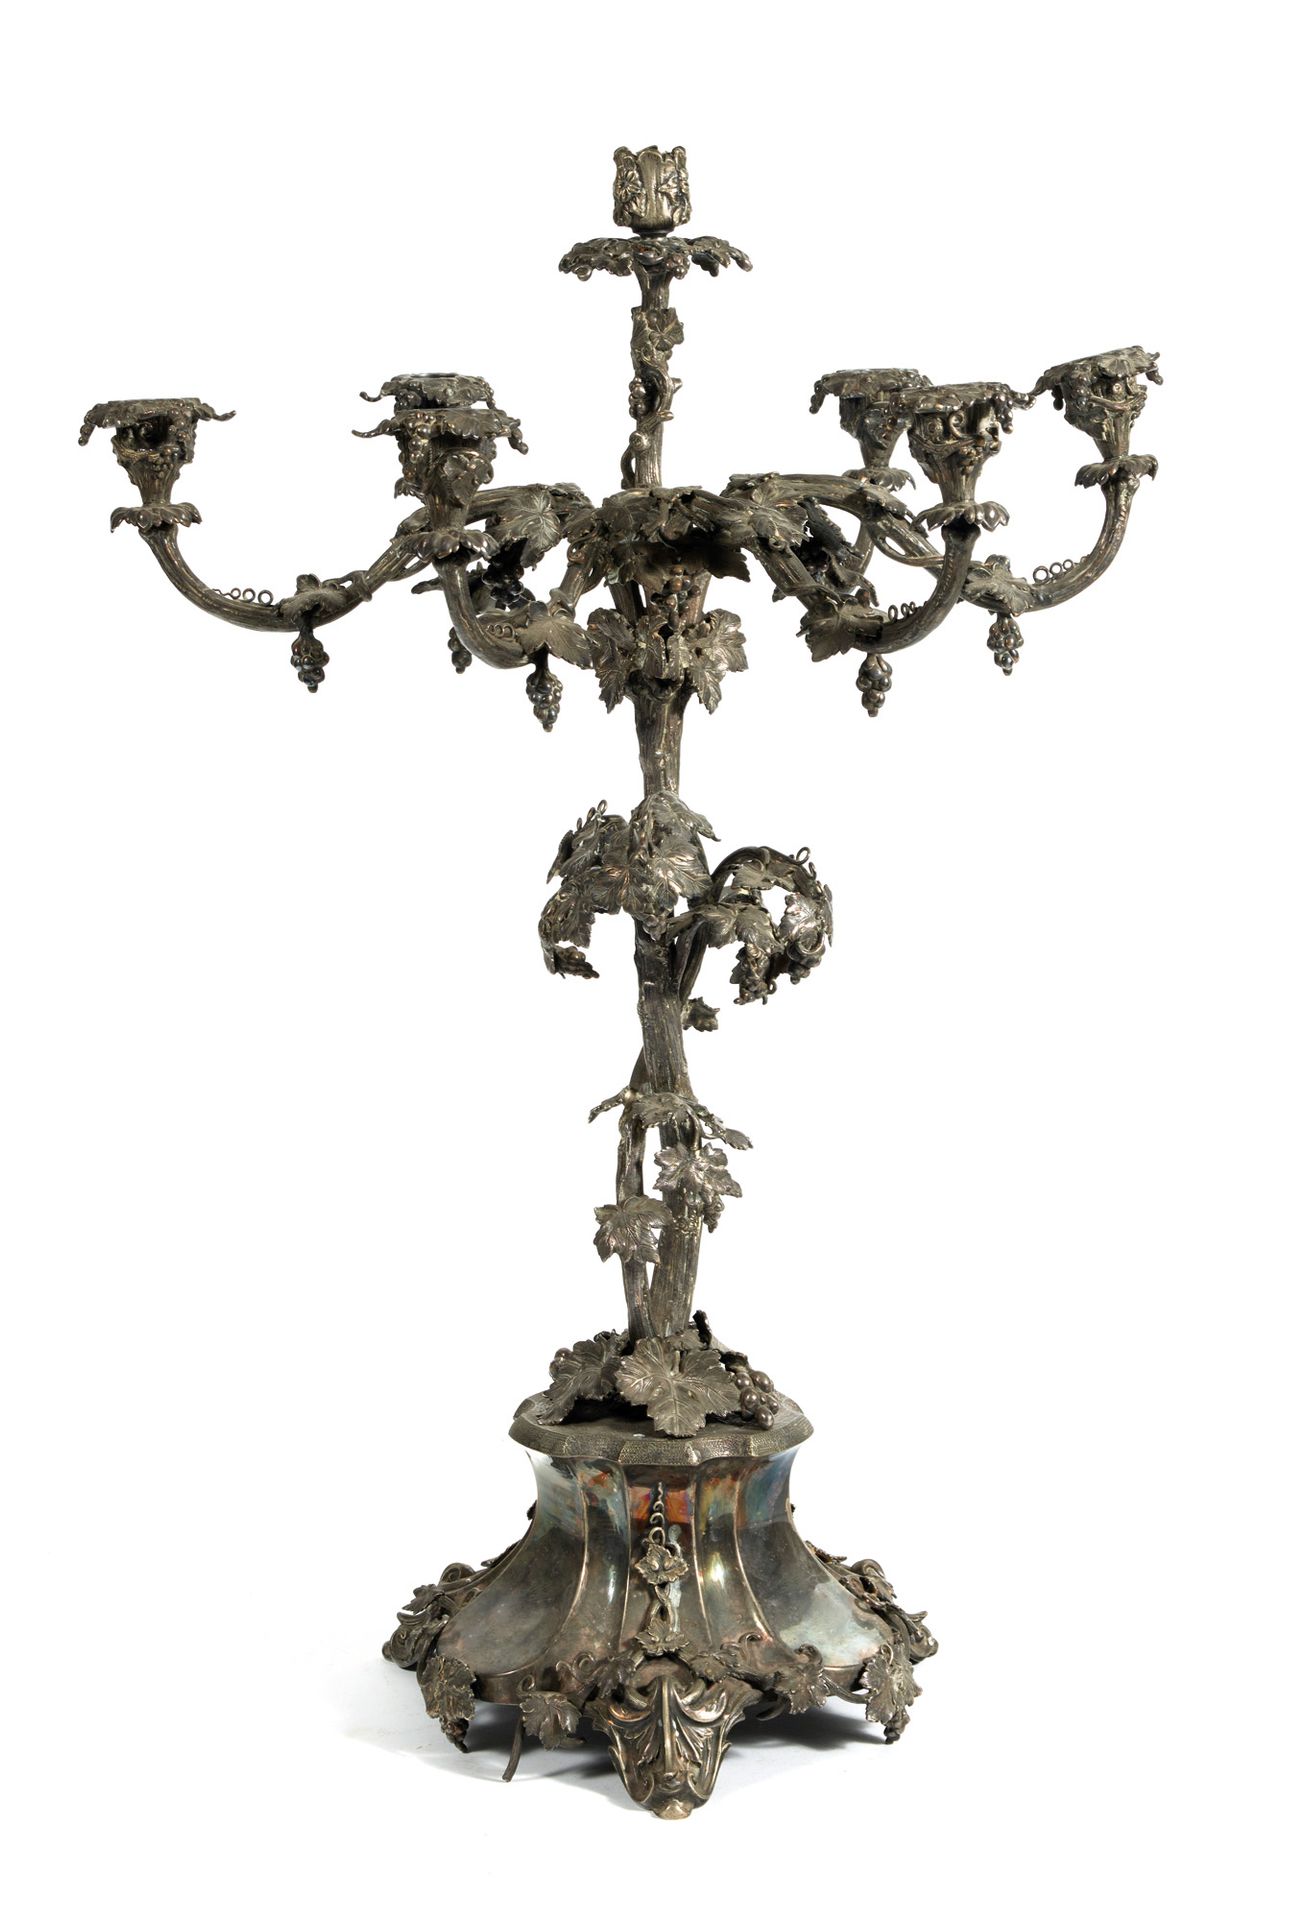 Grand candélabre Large candelabra

in silver plated metal decorated with vine le&hellip;